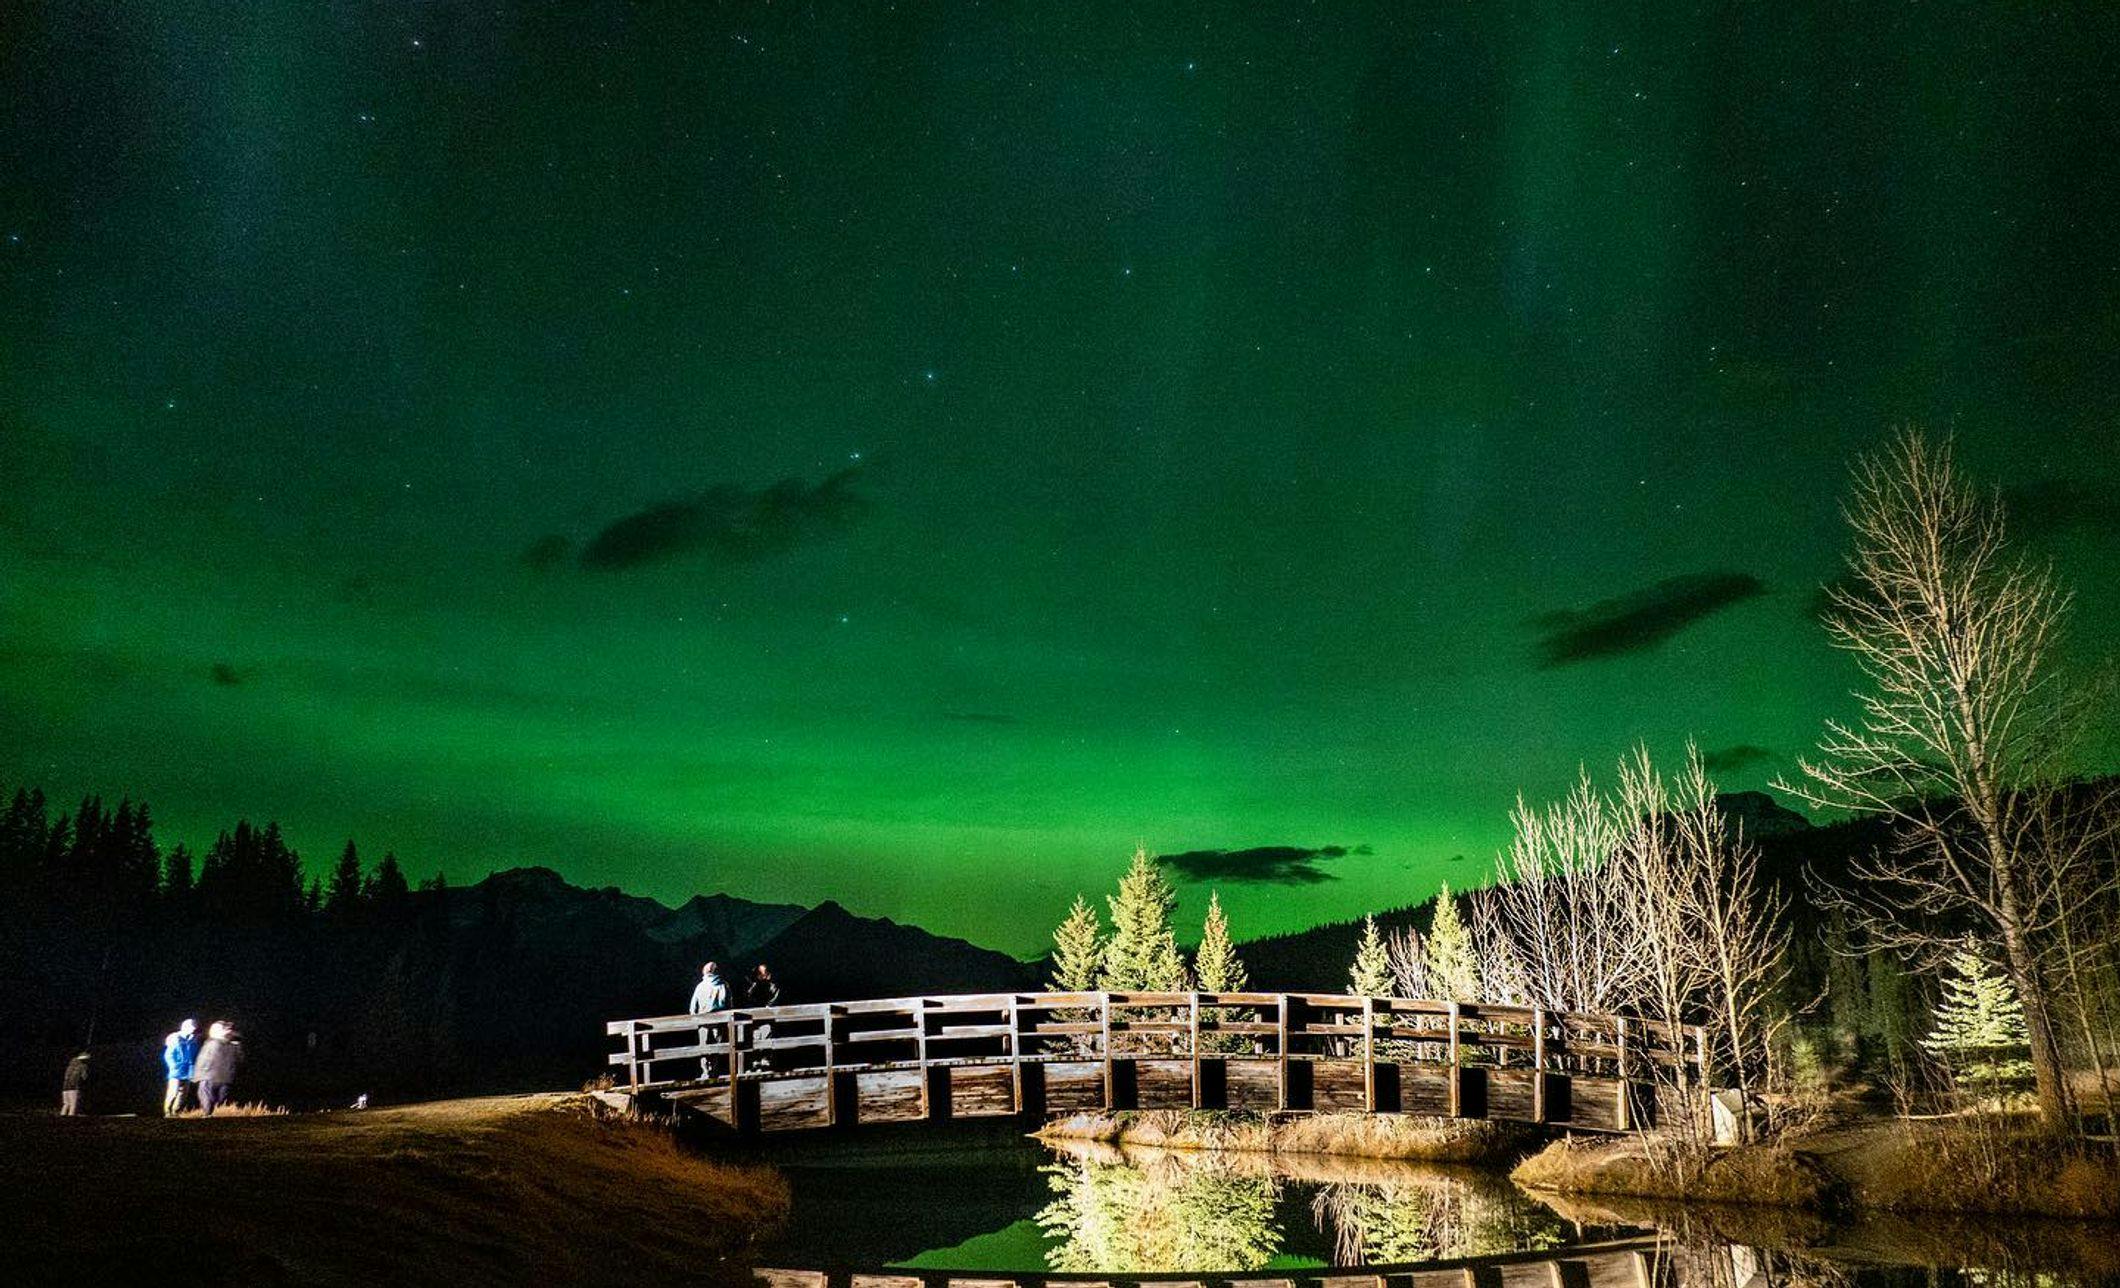 A bridge over a river at night with green aurora lighting up the sky and people out admiring it